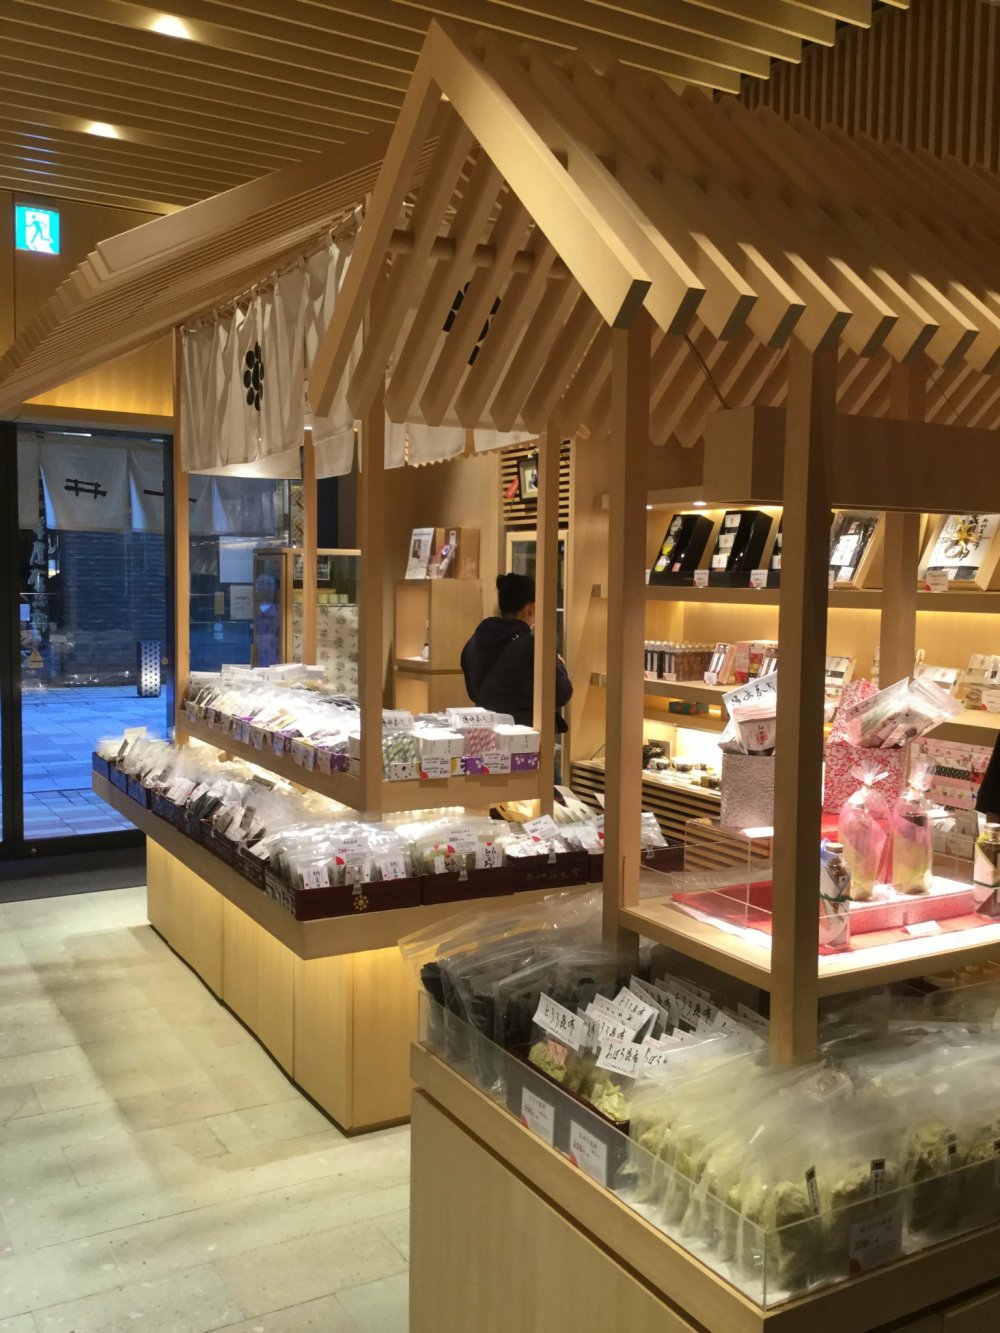 The floor of the shop is made of Shakudani, a volcanic rock found in Fukui Prefecture and was significantly important to the business as they traded these for kombu in Hokkaido